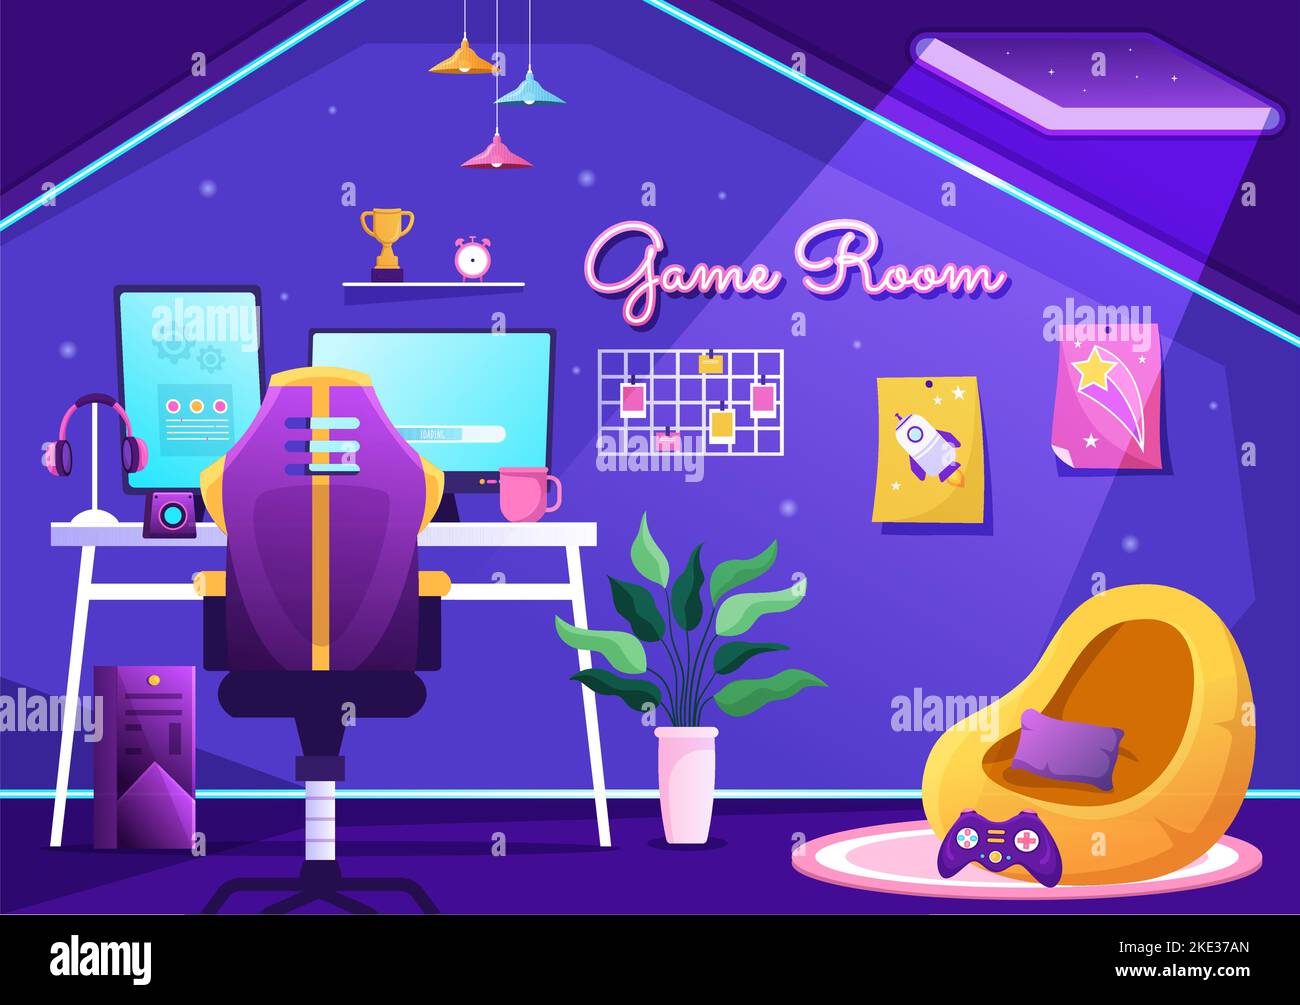 Video Game Room Interior with Android Mobile Computer and Comfortable Armchairs for Gamers in Flat Cartoon Hand Drawn Template Illustration Stock Vector